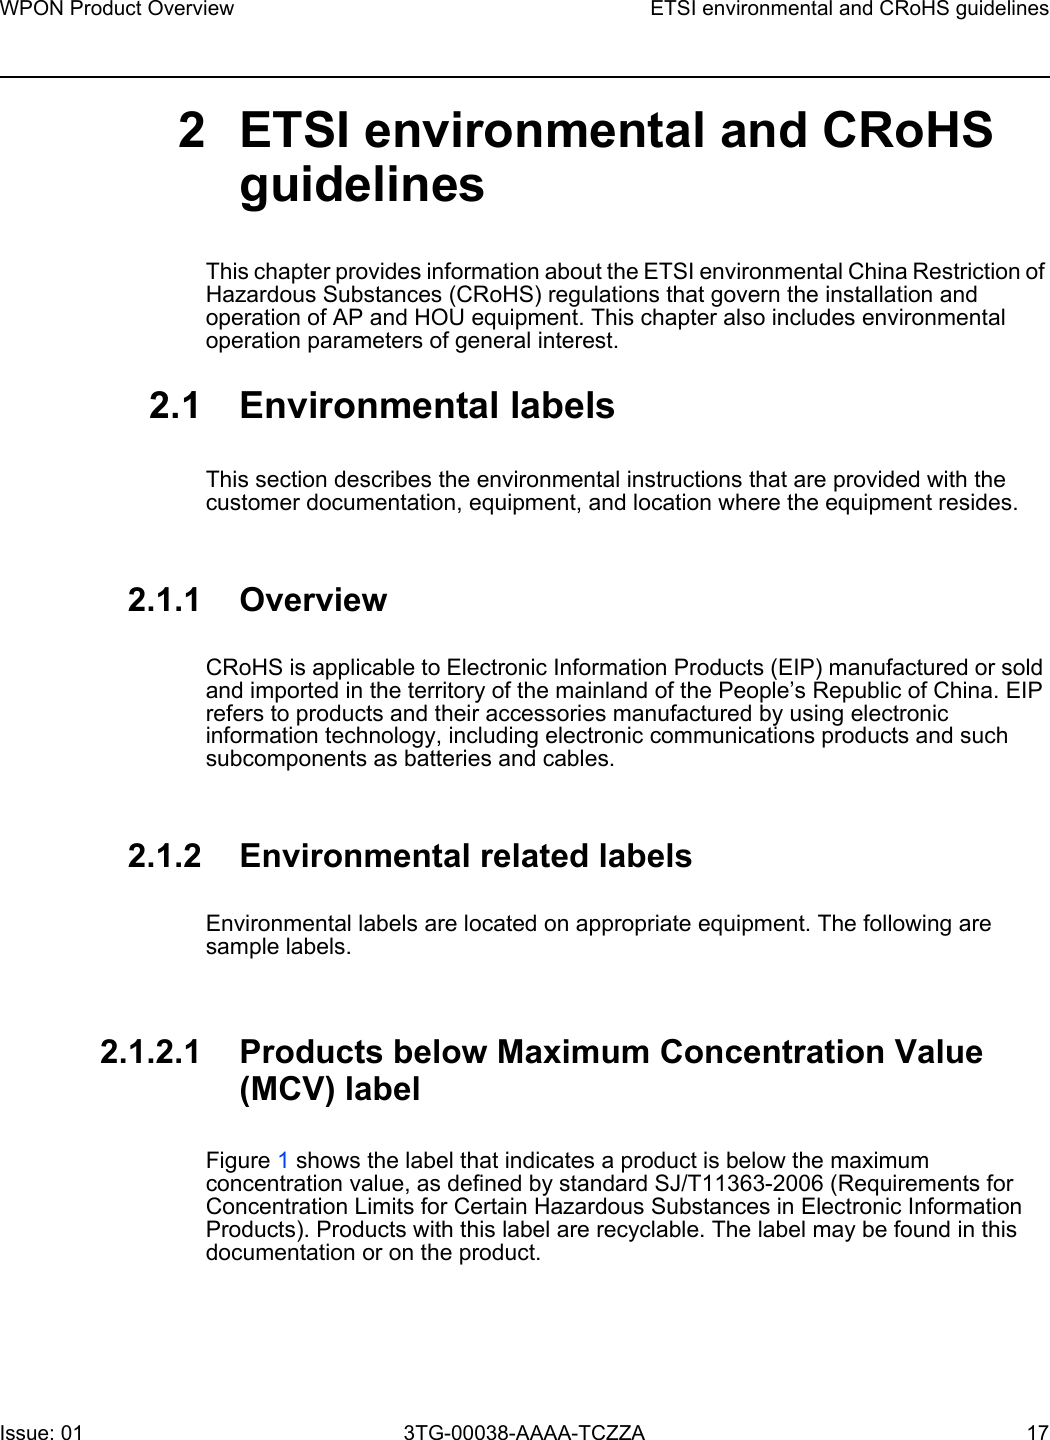 WPON Product Overview ETSI environmental and CRoHS guidelinesIssue: 01 3TG-00038-AAAA-TCZZA 17 2 ETSI environmental and CRoHS guidelinesThis chapter provides information about the ETSI environmental China Restriction of Hazardous Substances (CRoHS) regulations that govern the installation and operation of AP and HOU equipment. This chapter also includes environmental operation parameters of general interest. 2.1 Environmental labelsThis section describes the environmental instructions that are provided with the customer documentation, equipment, and location where the equipment resides.2.1.1 OverviewCRoHS is applicable to Electronic Information Products (EIP) manufactured or sold and imported in the territory of the mainland of the People’s Republic of China. EIP refers to products and their accessories manufactured by using electronic information technology, including electronic communications products and such subcomponents as batteries and cables.2.1.2 Environmental related labelsEnvironmental labels are located on appropriate equipment. The following are sample labels.2.1.2.1 Products below Maximum Concentration Value (MCV) labelFigure 1 shows the label that indicates a product is below the maximum concentration value, as defined by standard SJ/T11363-2006 (Requirements for Concentration Limits for Certain Hazardous Substances in Electronic Information Products). Products with this label are recyclable. The label may be found in this documentation or on the product.